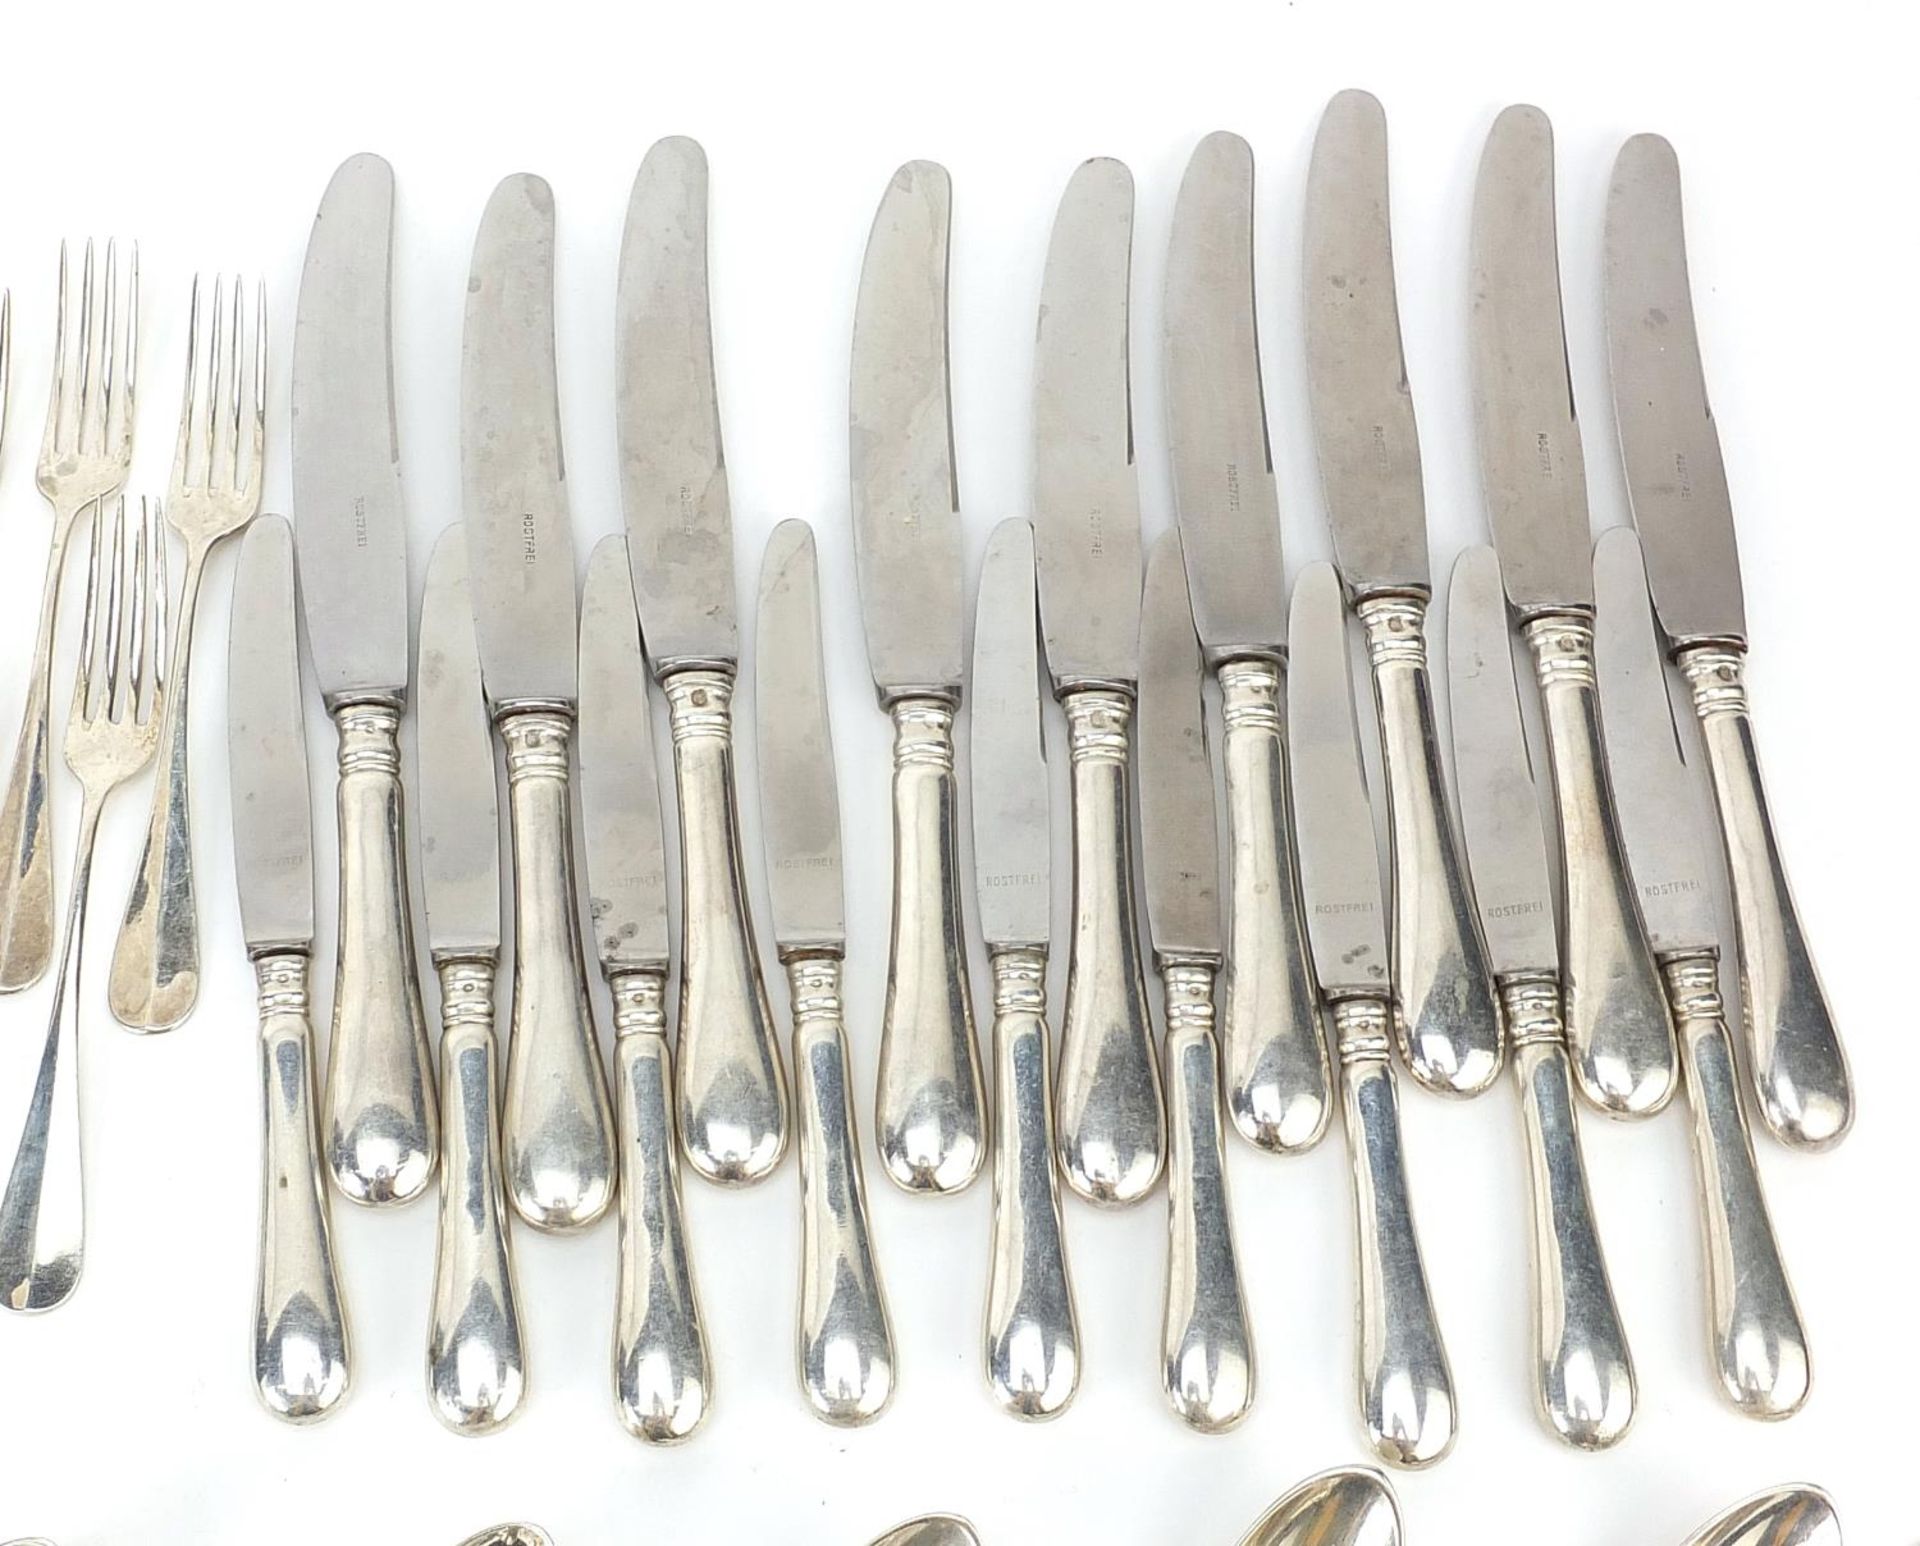 German silver cutlery including tablespoons, knives with steel blades, forks and teaspoons, the - Image 3 of 6